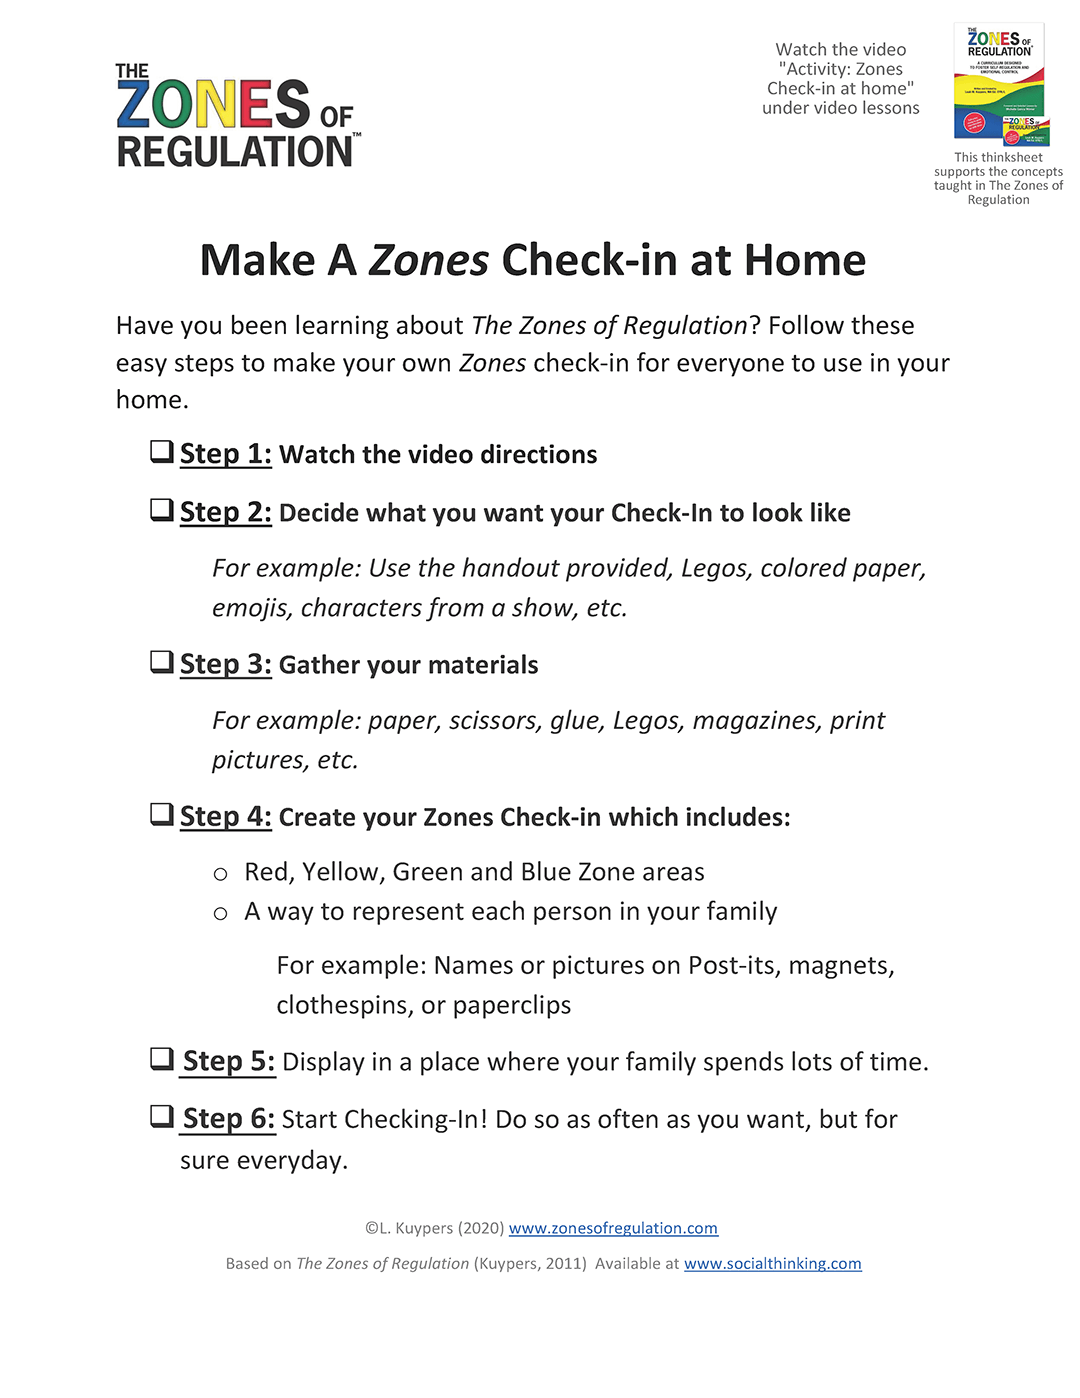 Create Zones Check-in for Home